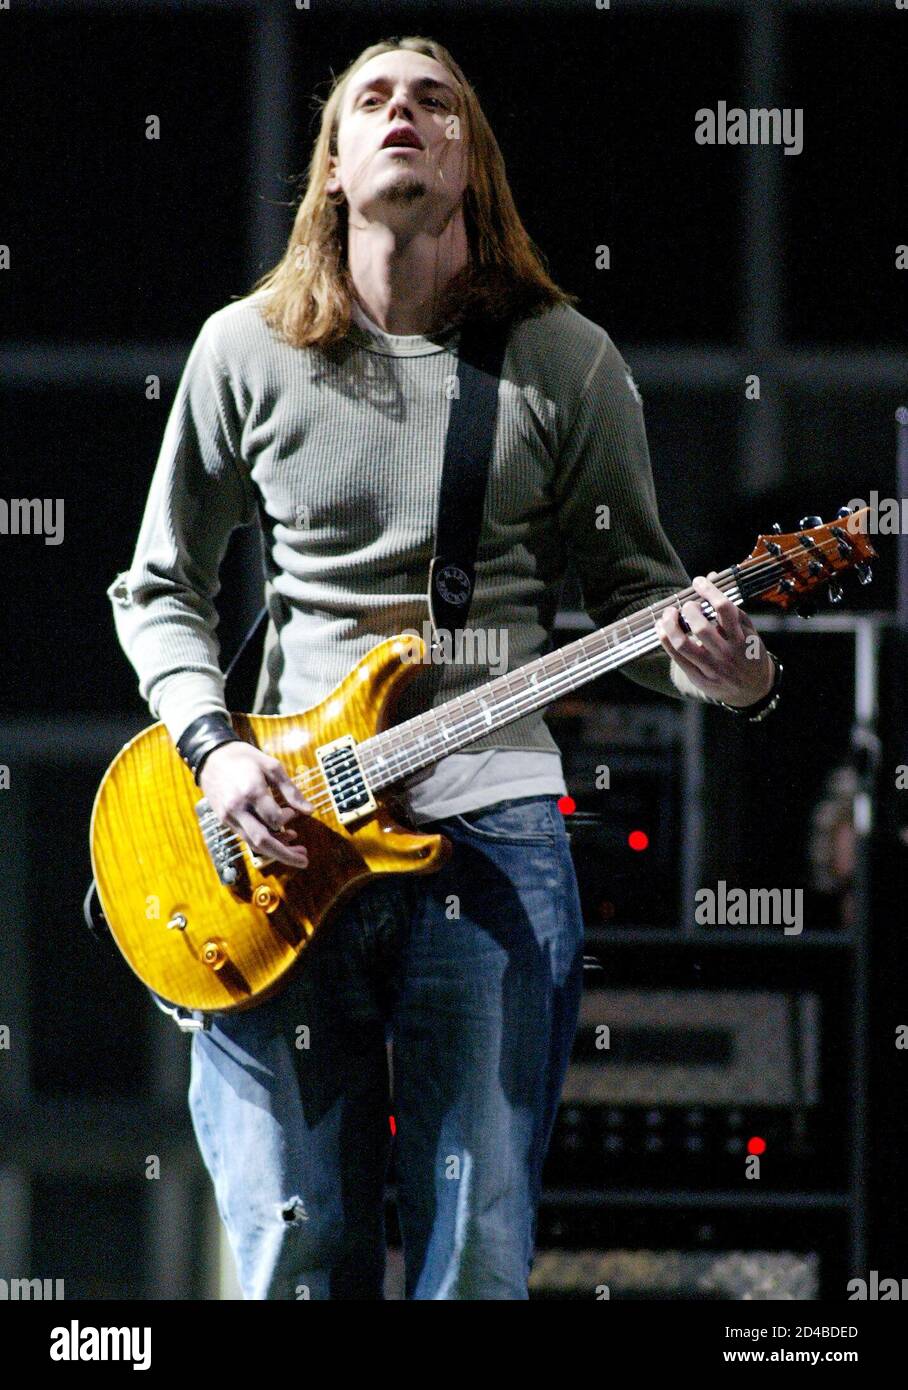 Puddle of Mudd guitarist Paul Phillips performs the song "She Hates Me" at  the 2002 Billboard Music Awards at the MGM Grand Garden Arena in Las Vegas,  Nevada December 9, 2002. The